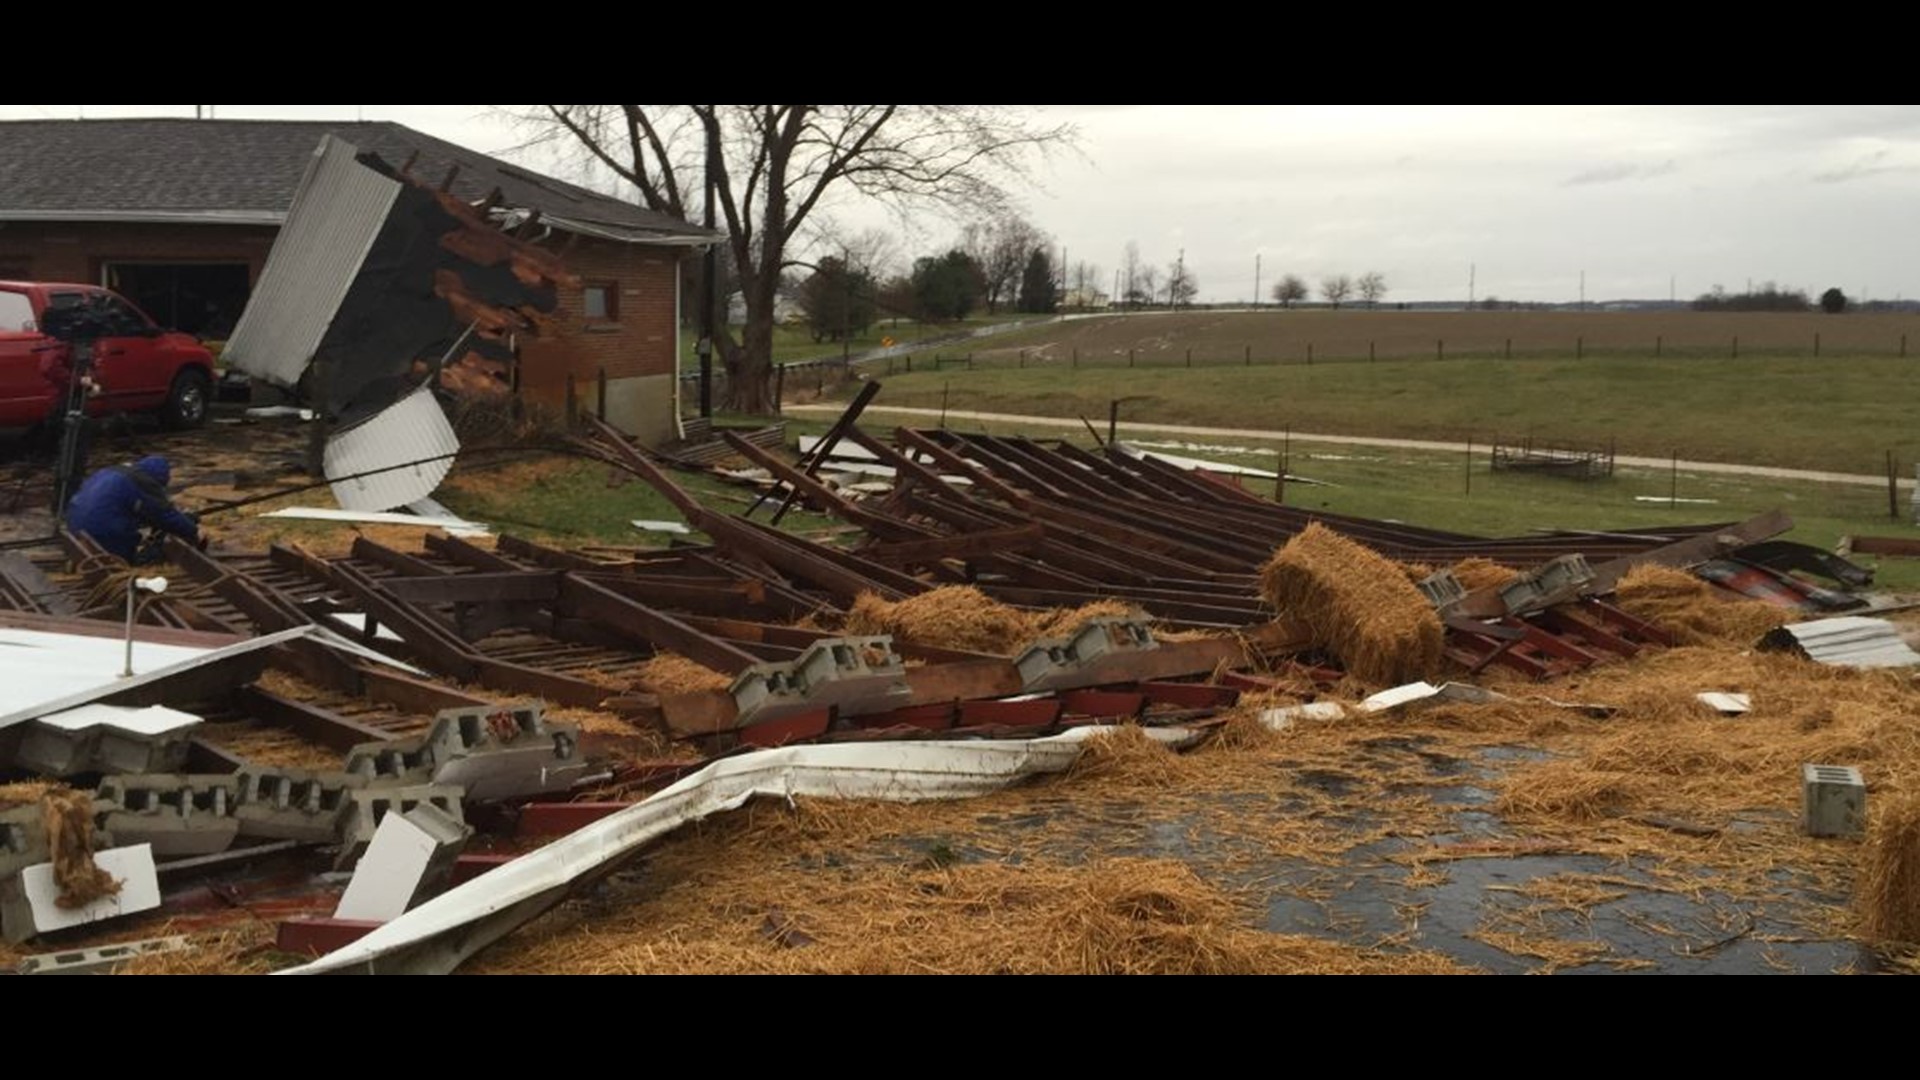 NWS determines six tornadoes touched down in Ohio on Wednesday